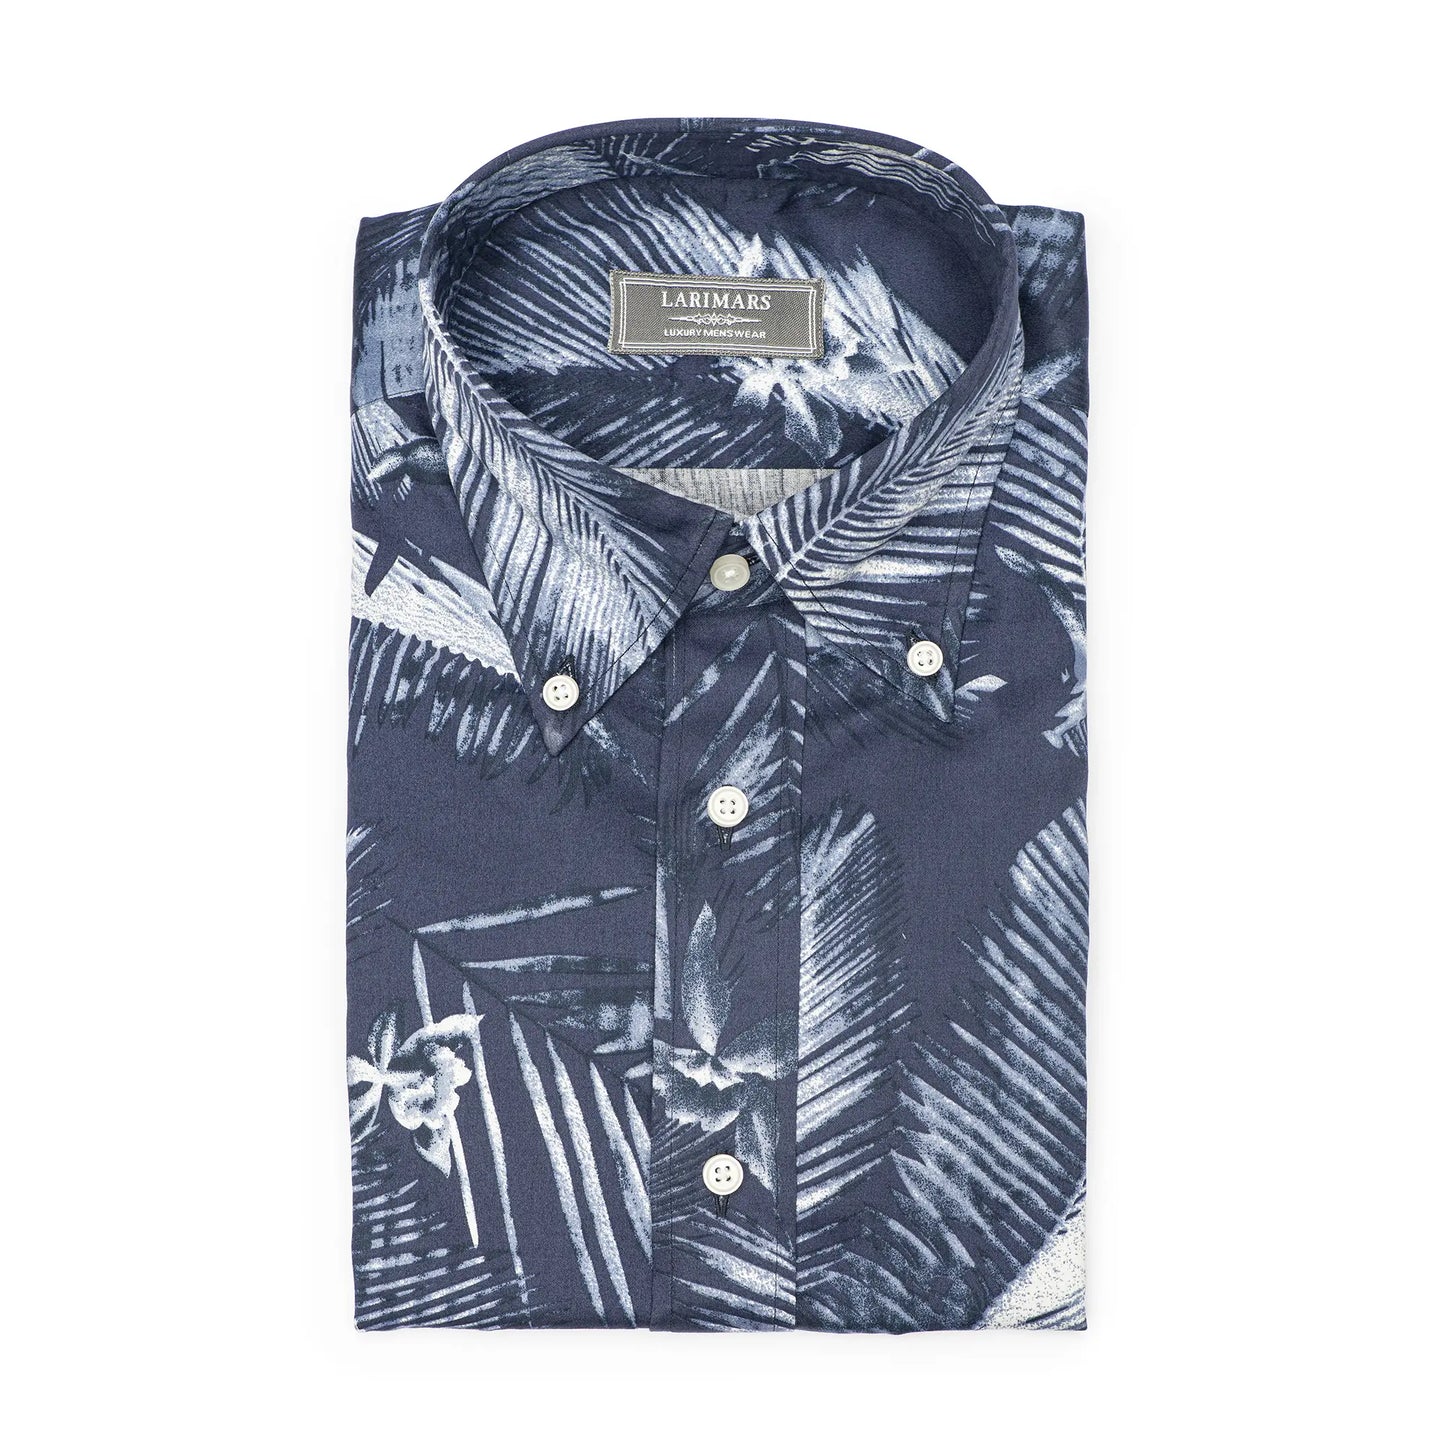 Blue Floral Print - Short Sleeve - Larimars Clothing Men's Formal and casual wear shirts